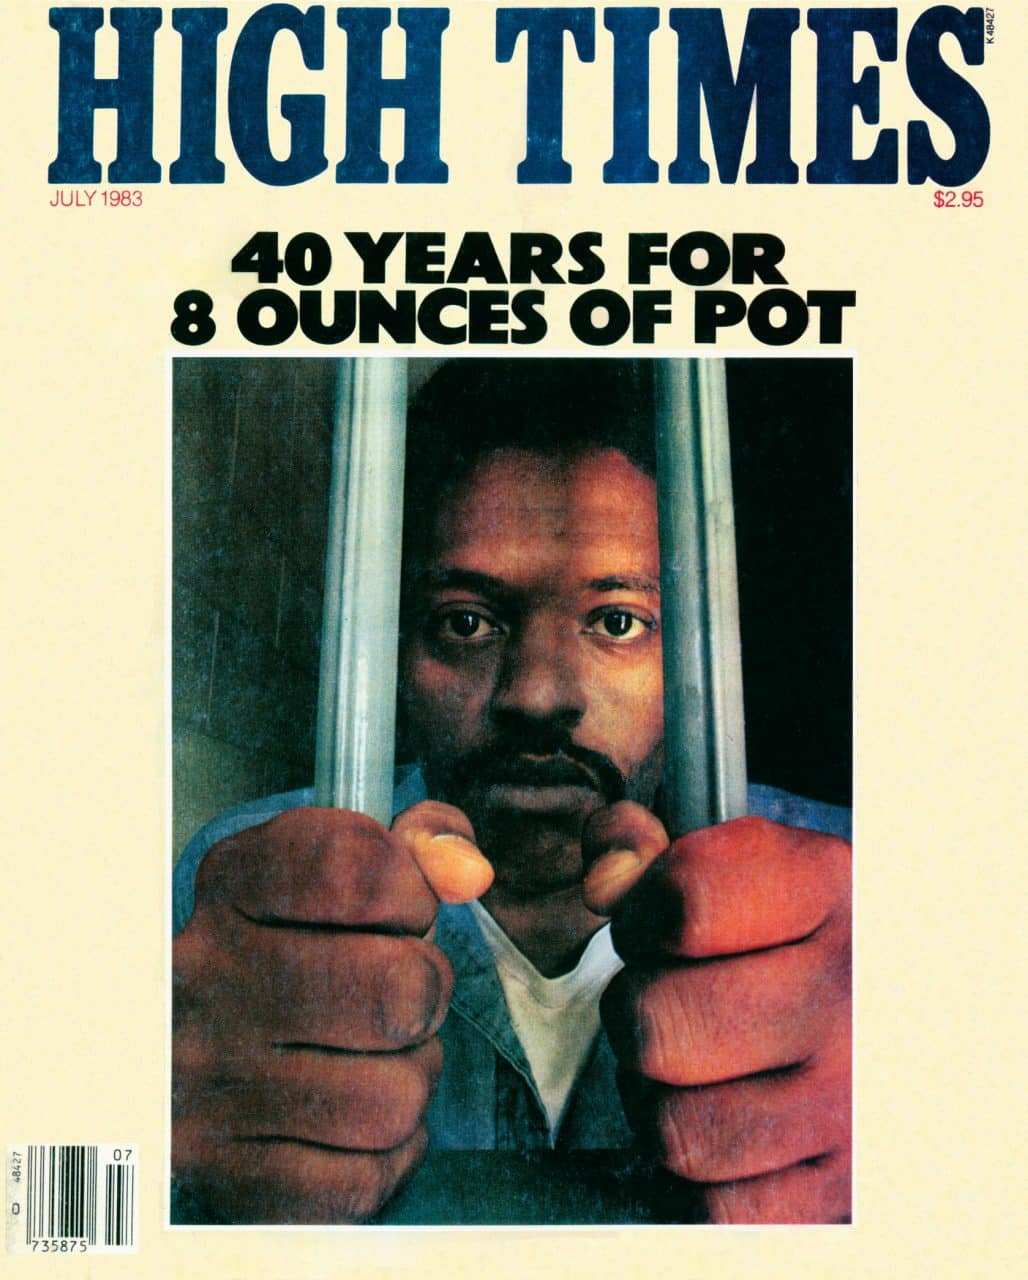 Roger Davis on High Times cover